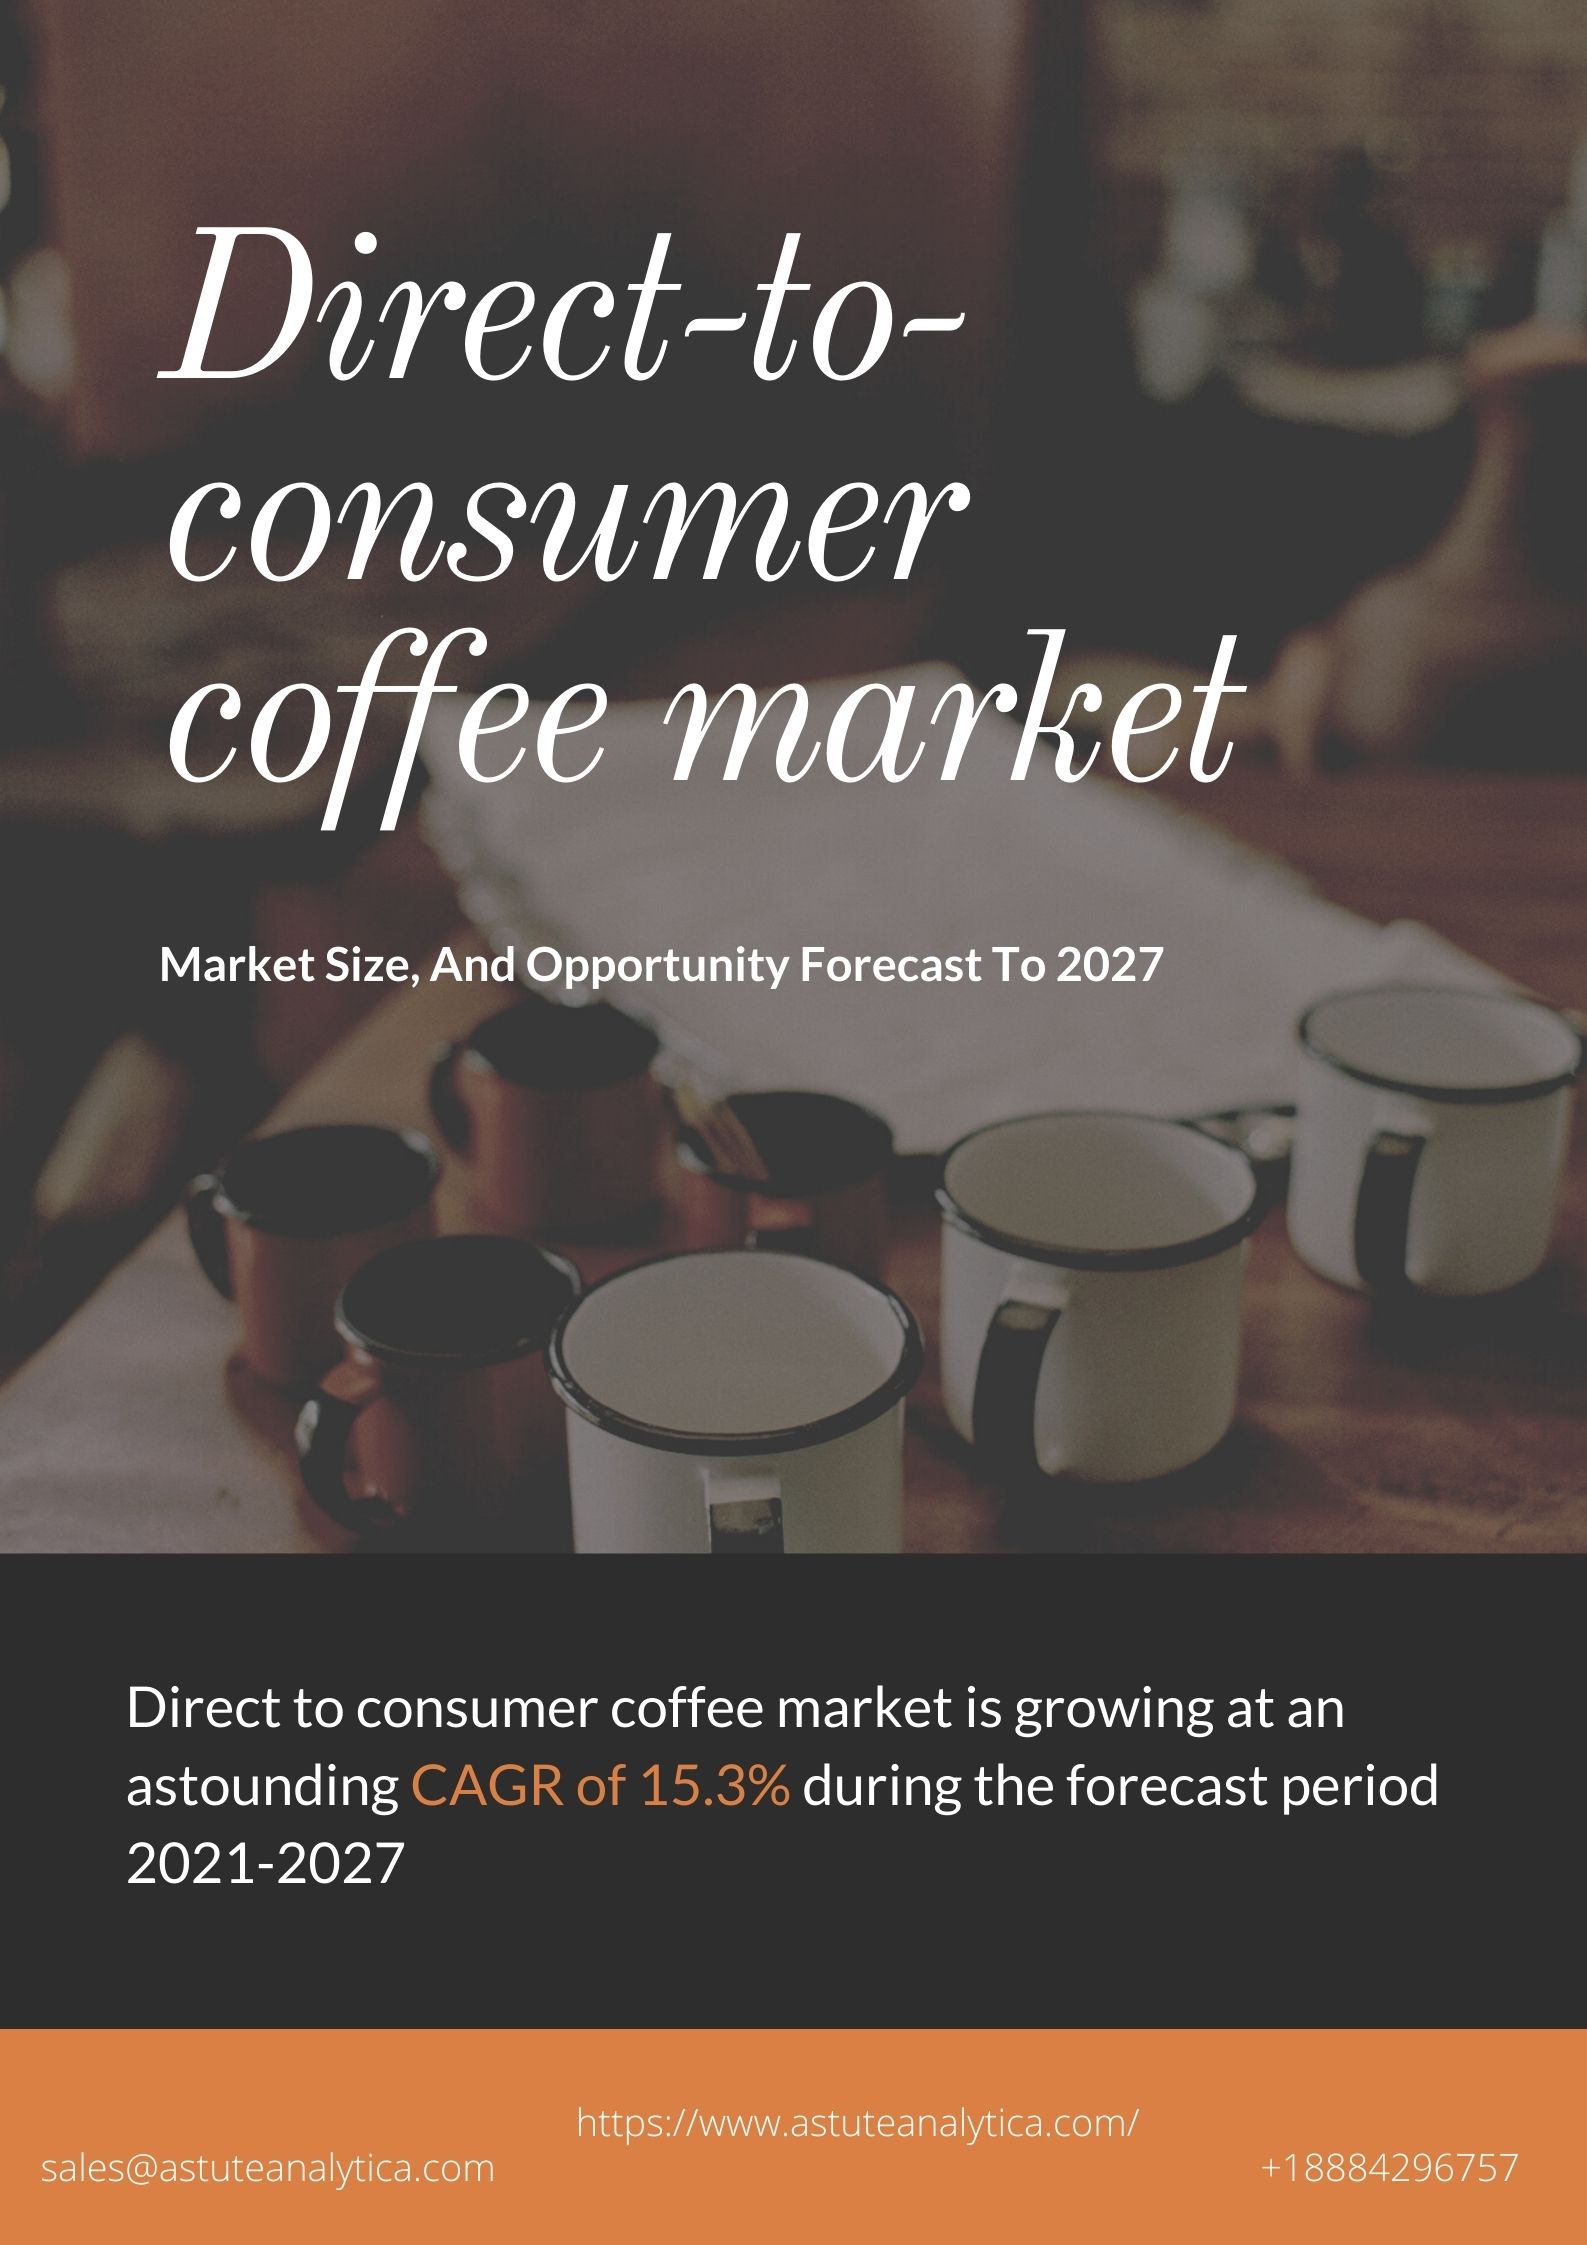 Exclusive research report on Direct-to-consumer coffee market 2021; Major players- Bean Box, Blue Bottle, Craft Coffee, Gevalia, Nestle, etc